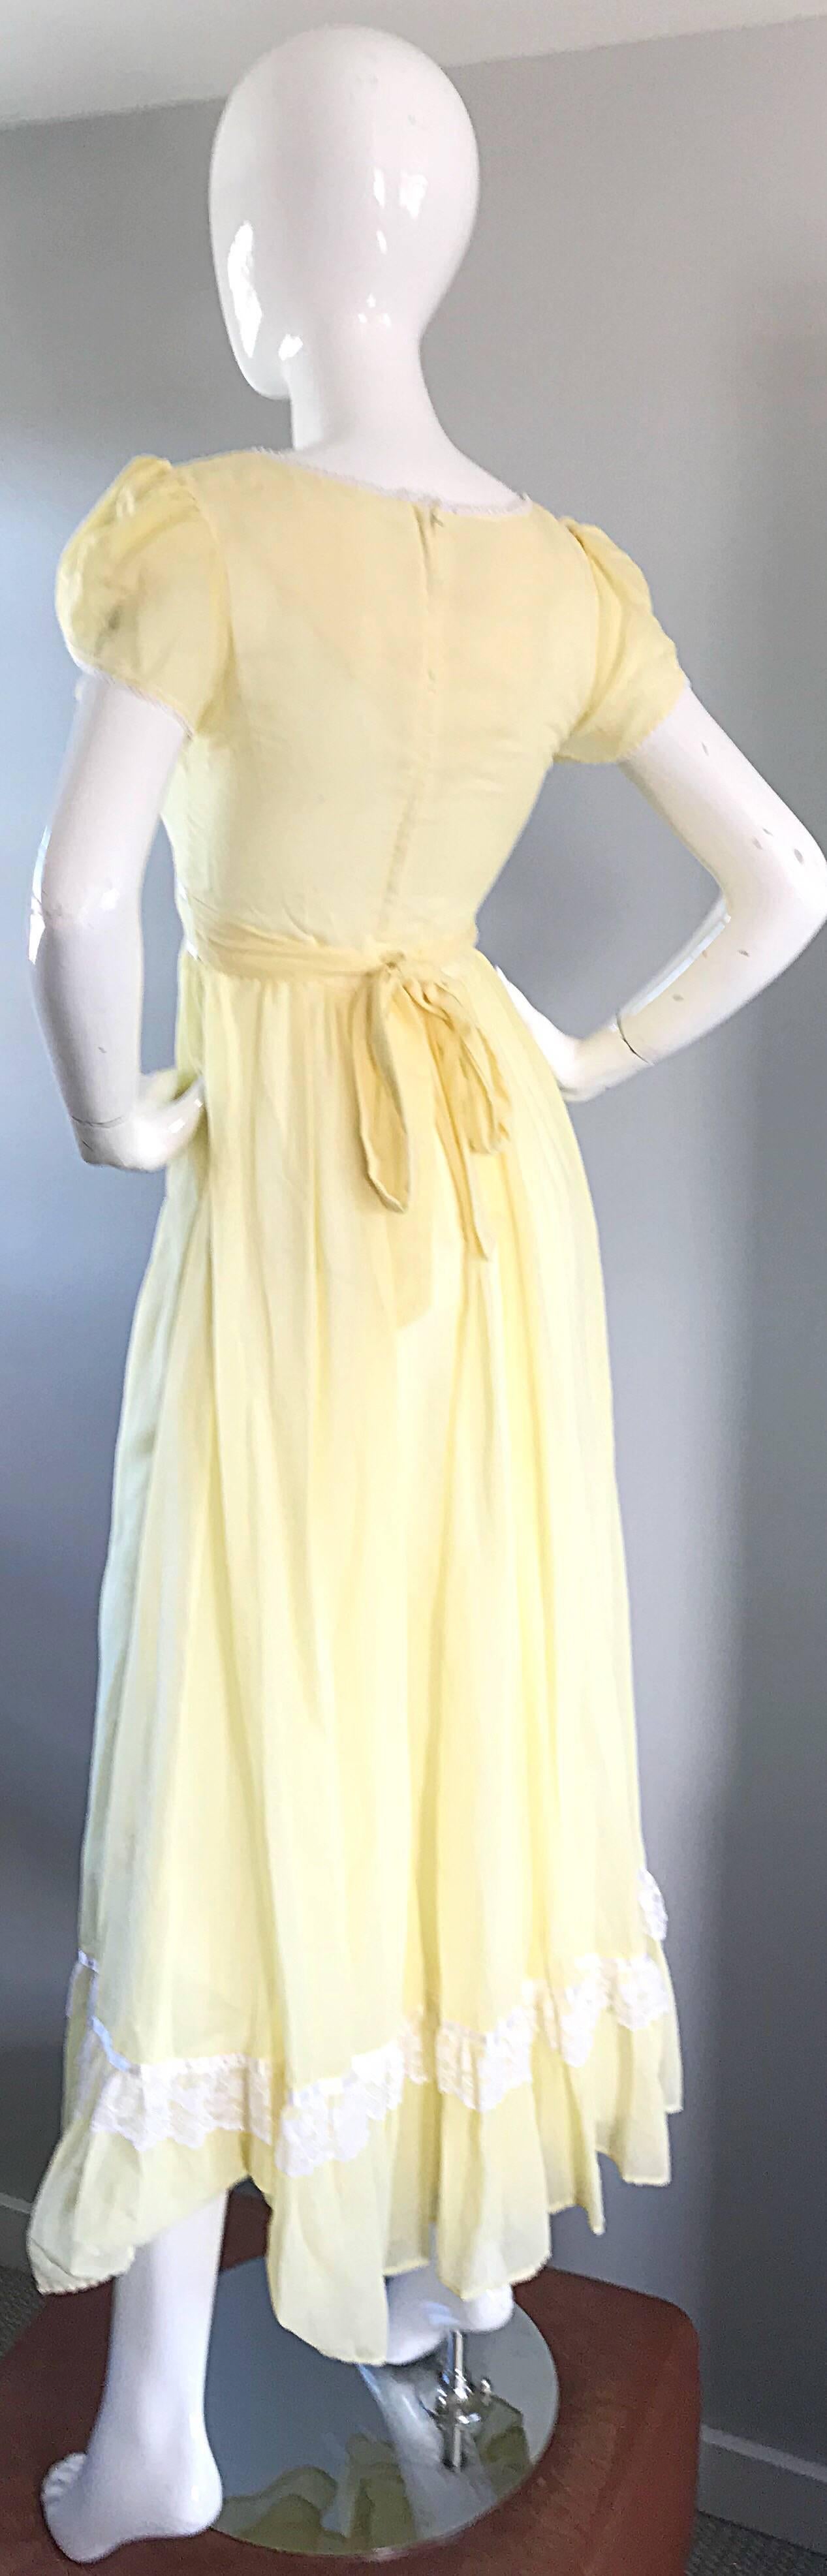 1970s Pale Yellow White Cotton Voile Pearl Encrusted Vintage 70s Boho Maxi Dress 4